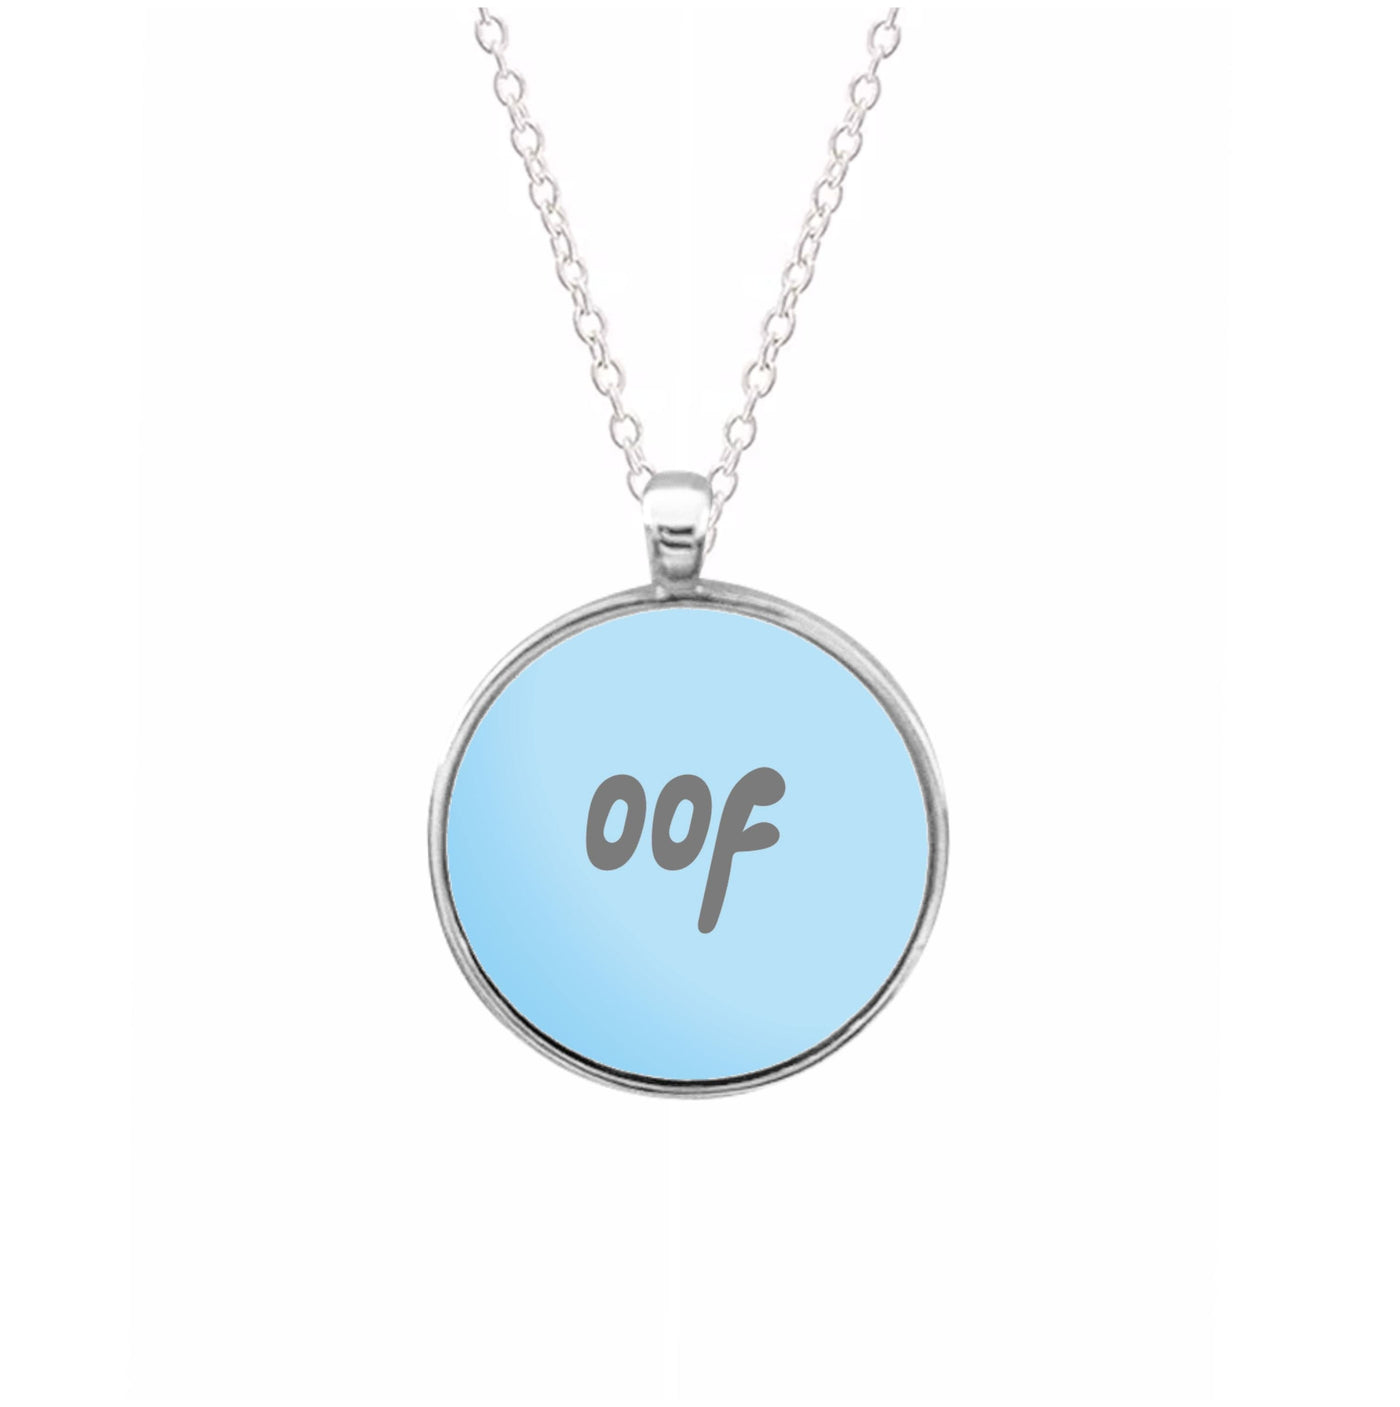 Oof - Roblox Necklace